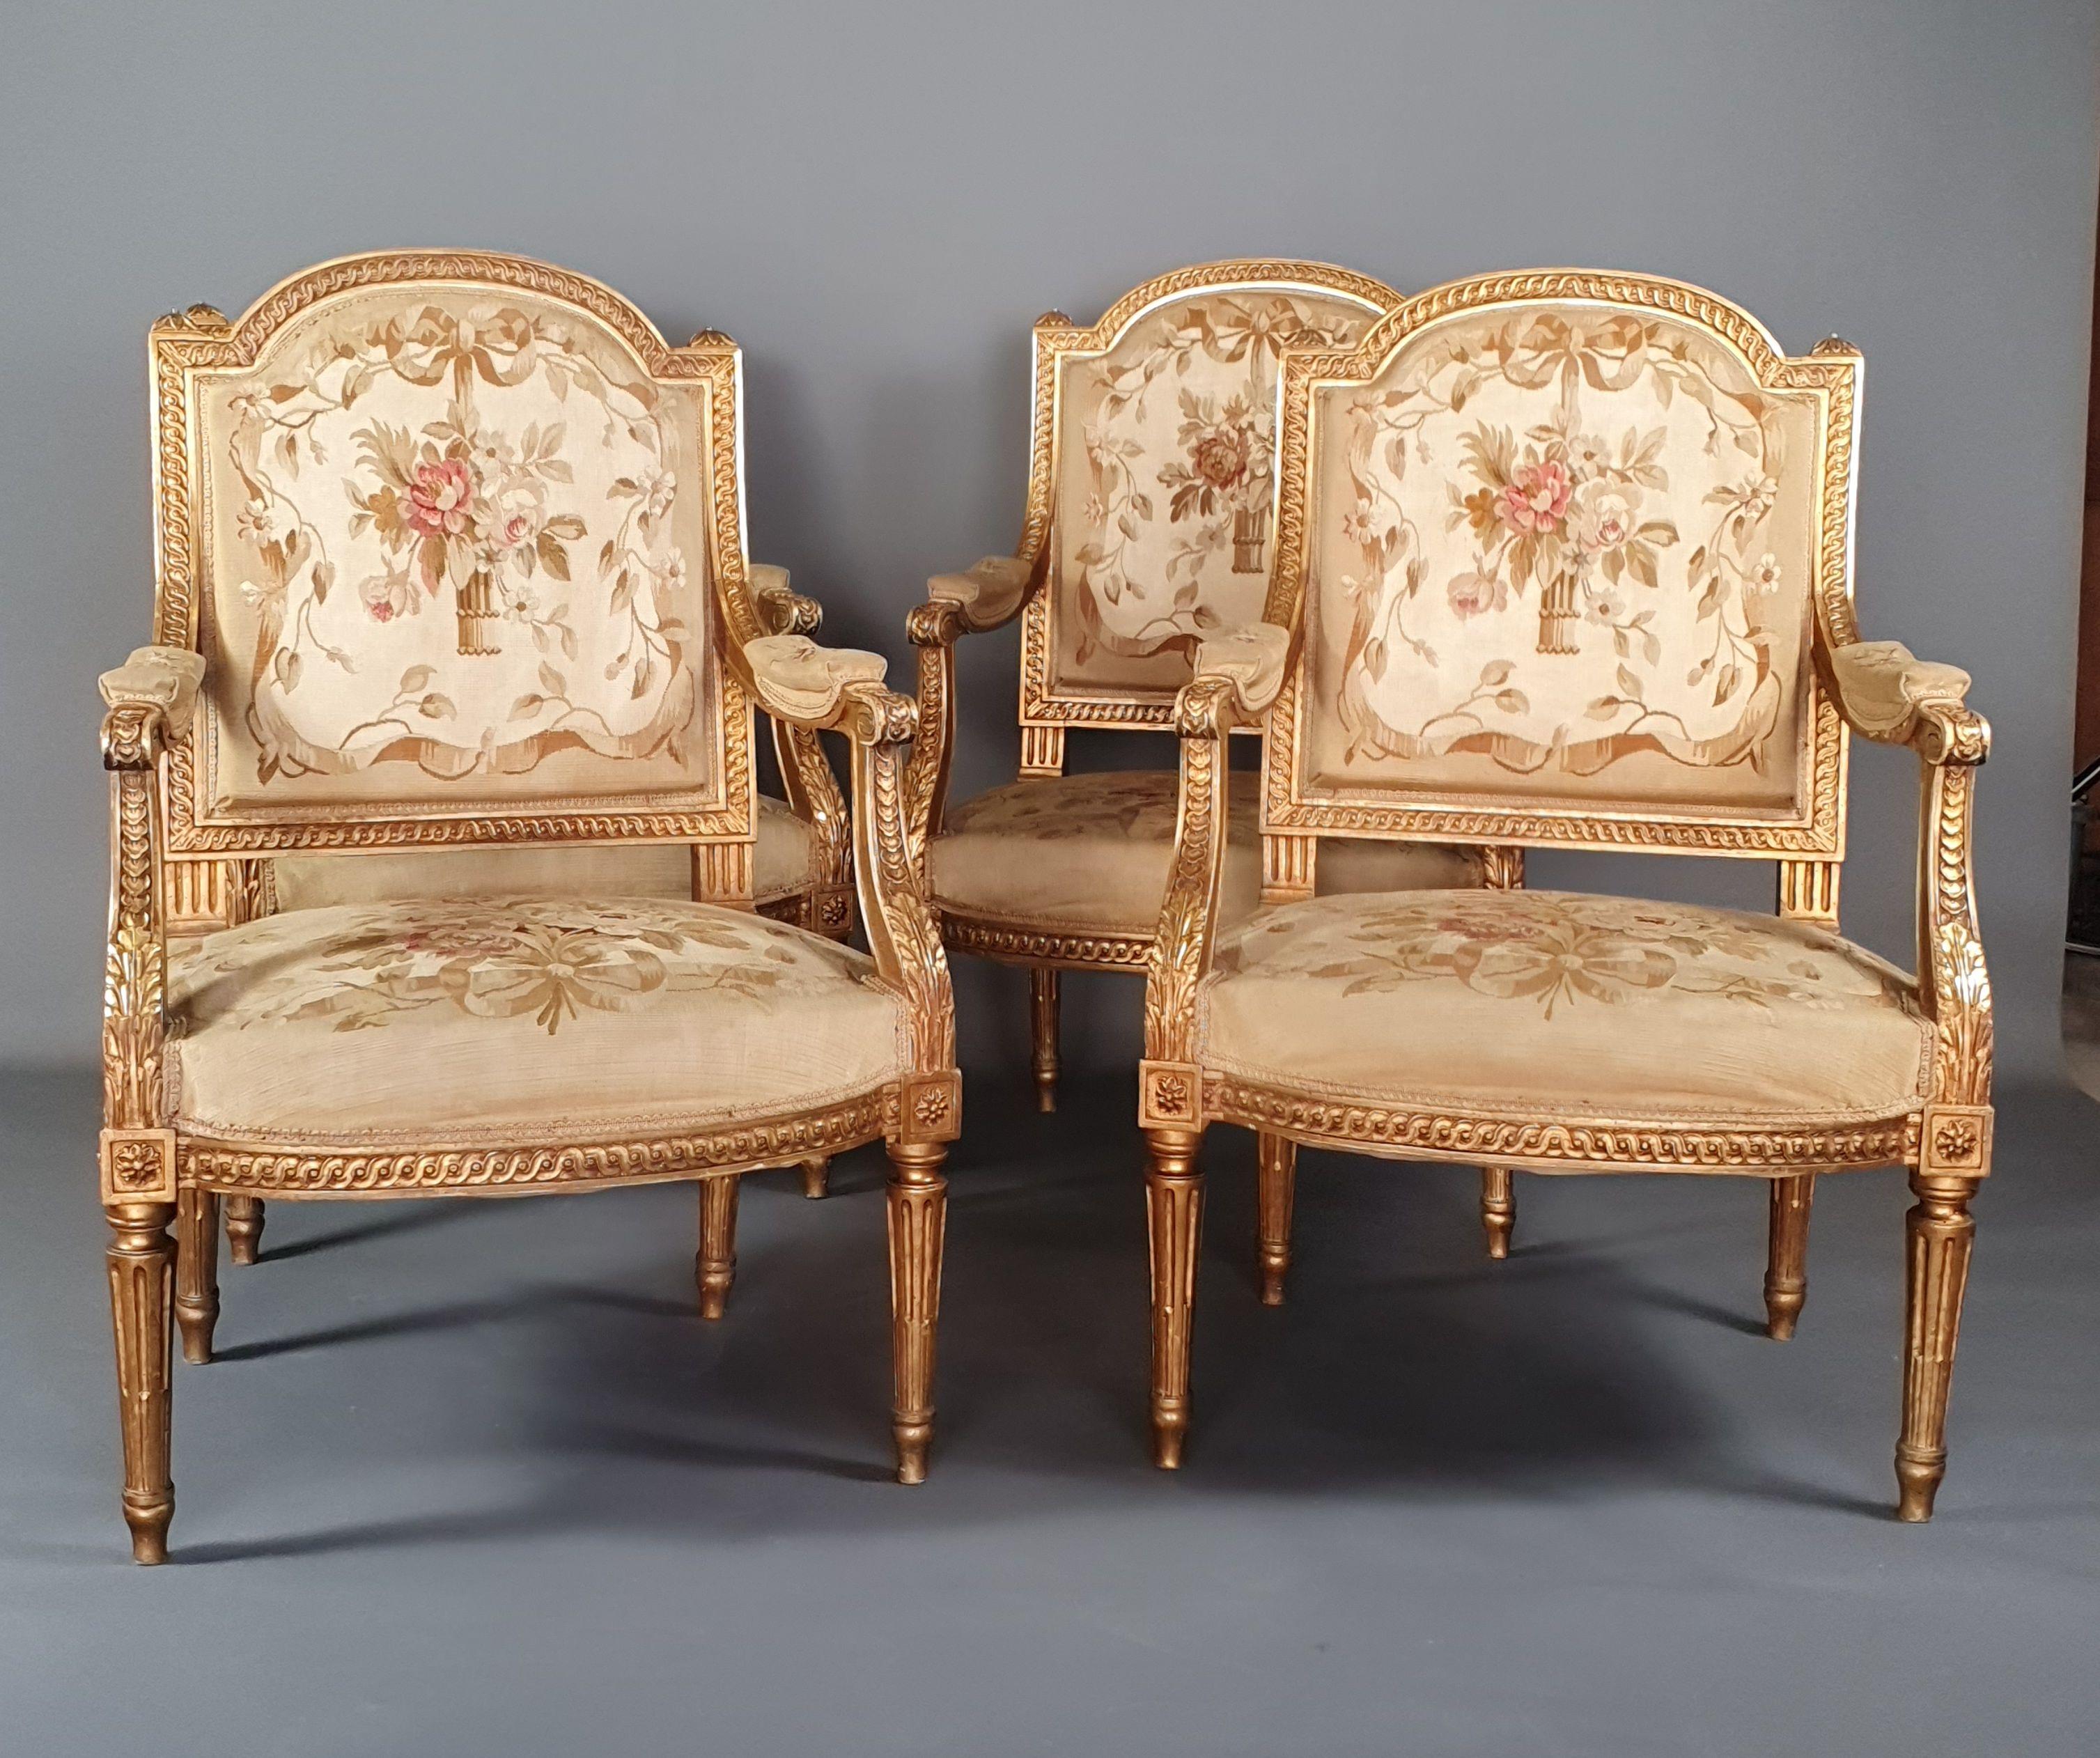 Louis XVI living room furniture in gilded wood richly carved with interlacing friezes and acanthus leaves, rudent fluted legs. Superb Abusson tapestry upholstery decorated with flower baskets and floral compositions in an entourage of branches and